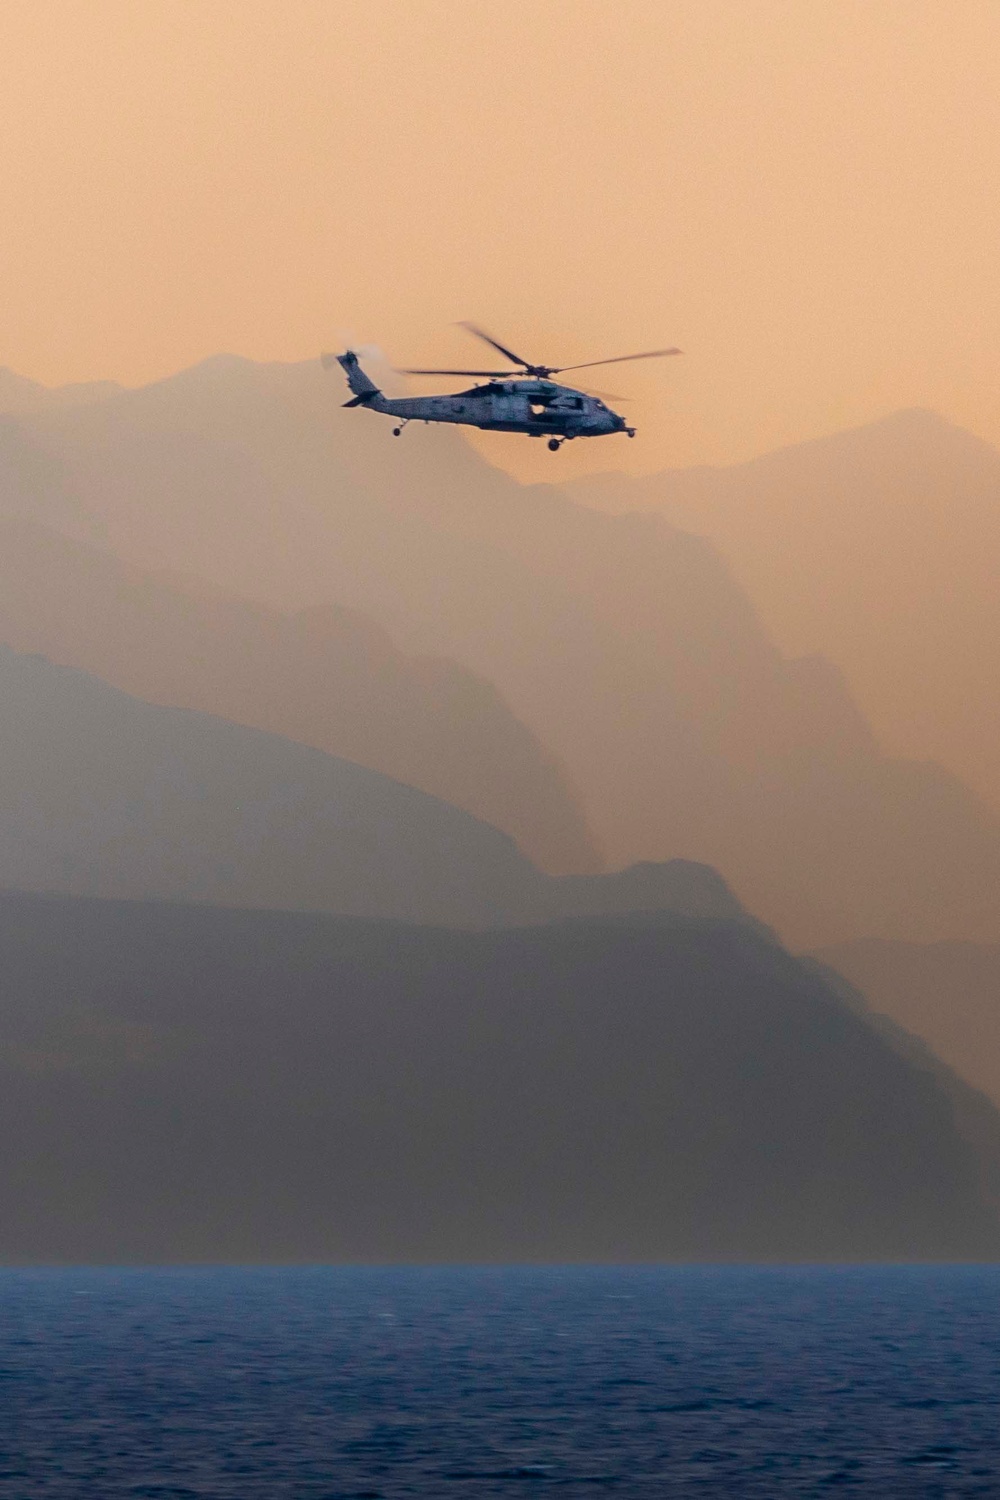 MH-60 Helicopter flies over Mountains in Strait of Hormuz